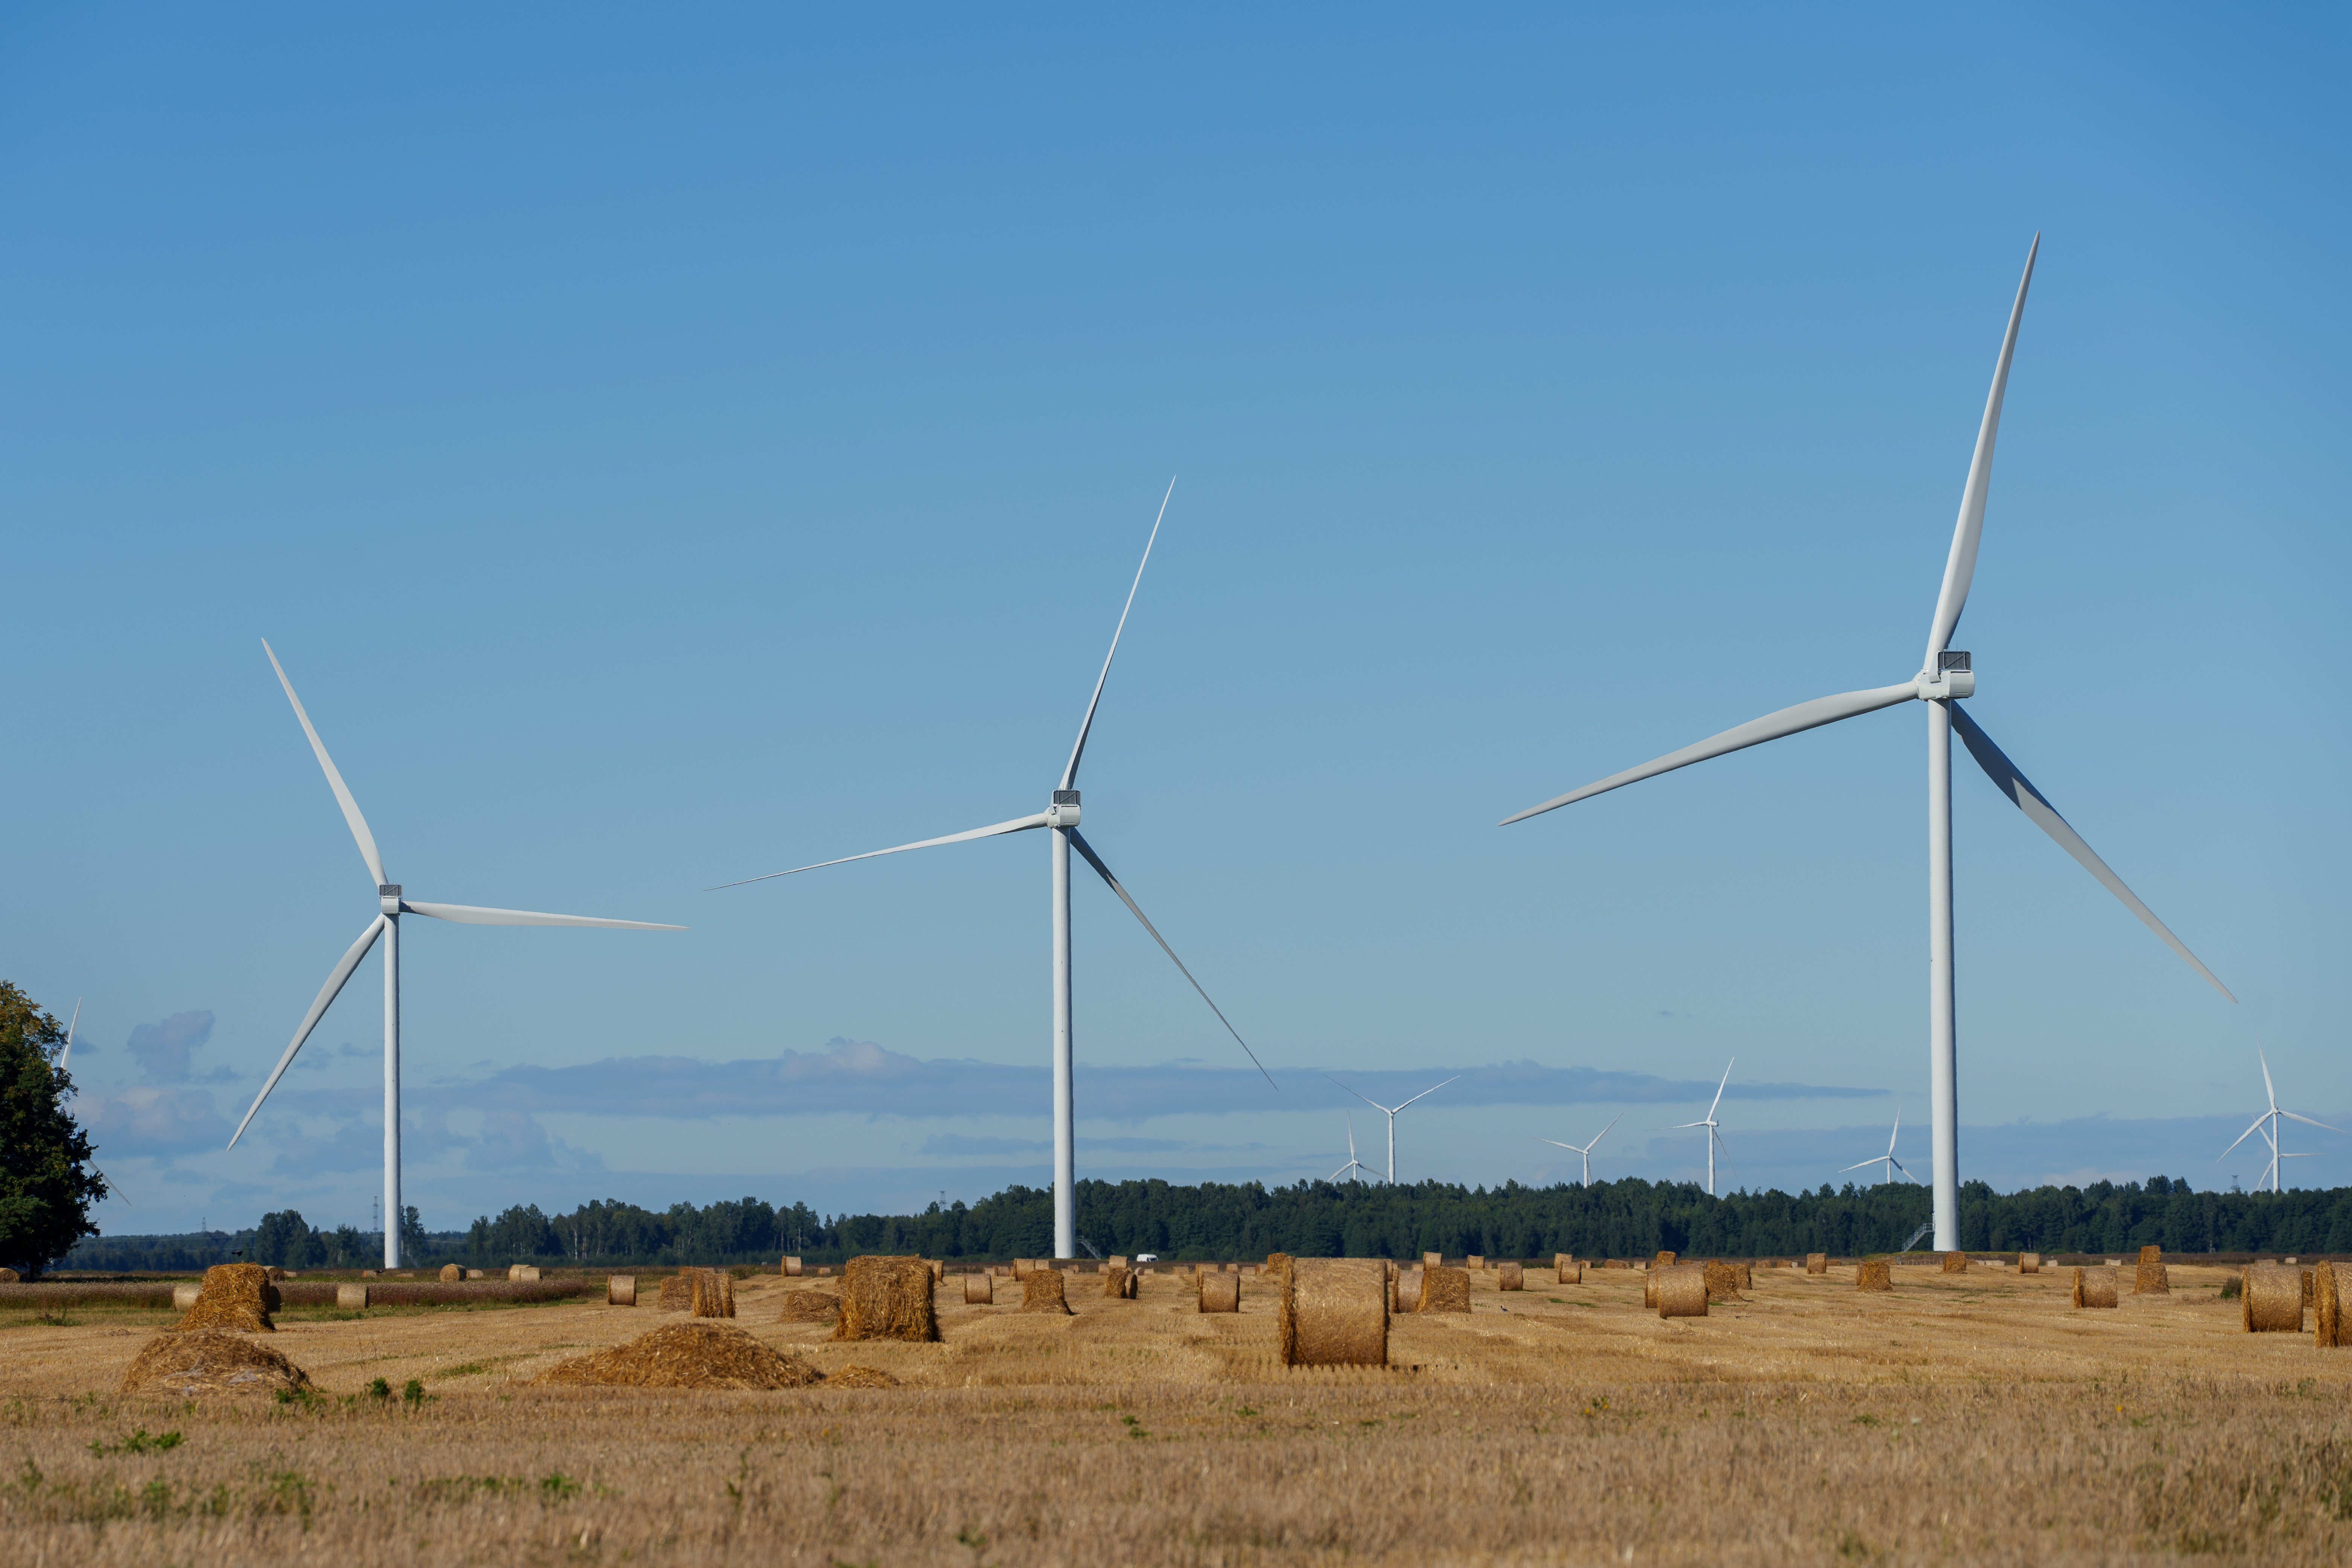 Tārgale onshore wind park inaugurated